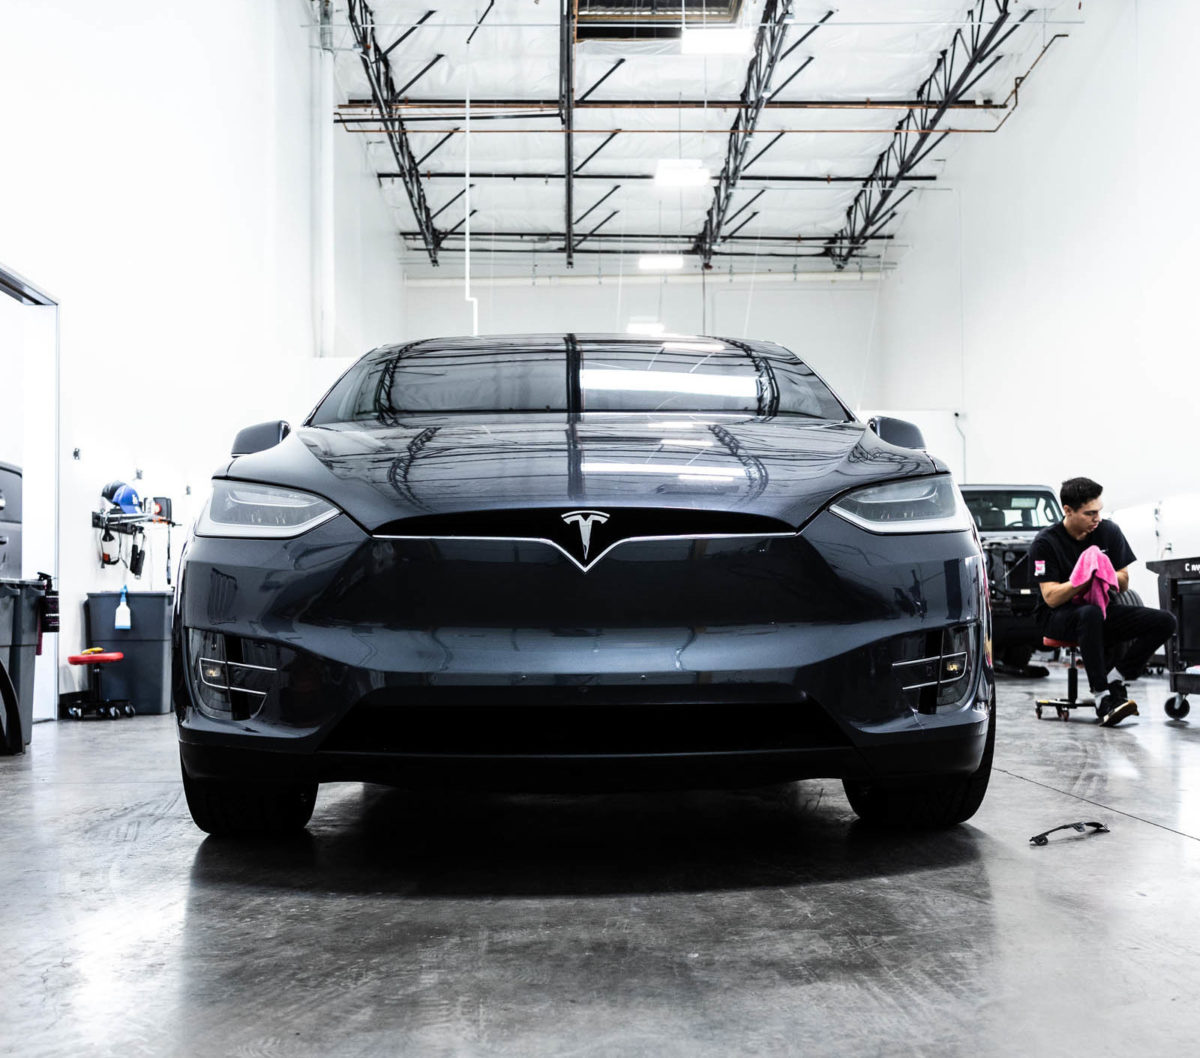 Cleaning and Maintenance of your Tesla